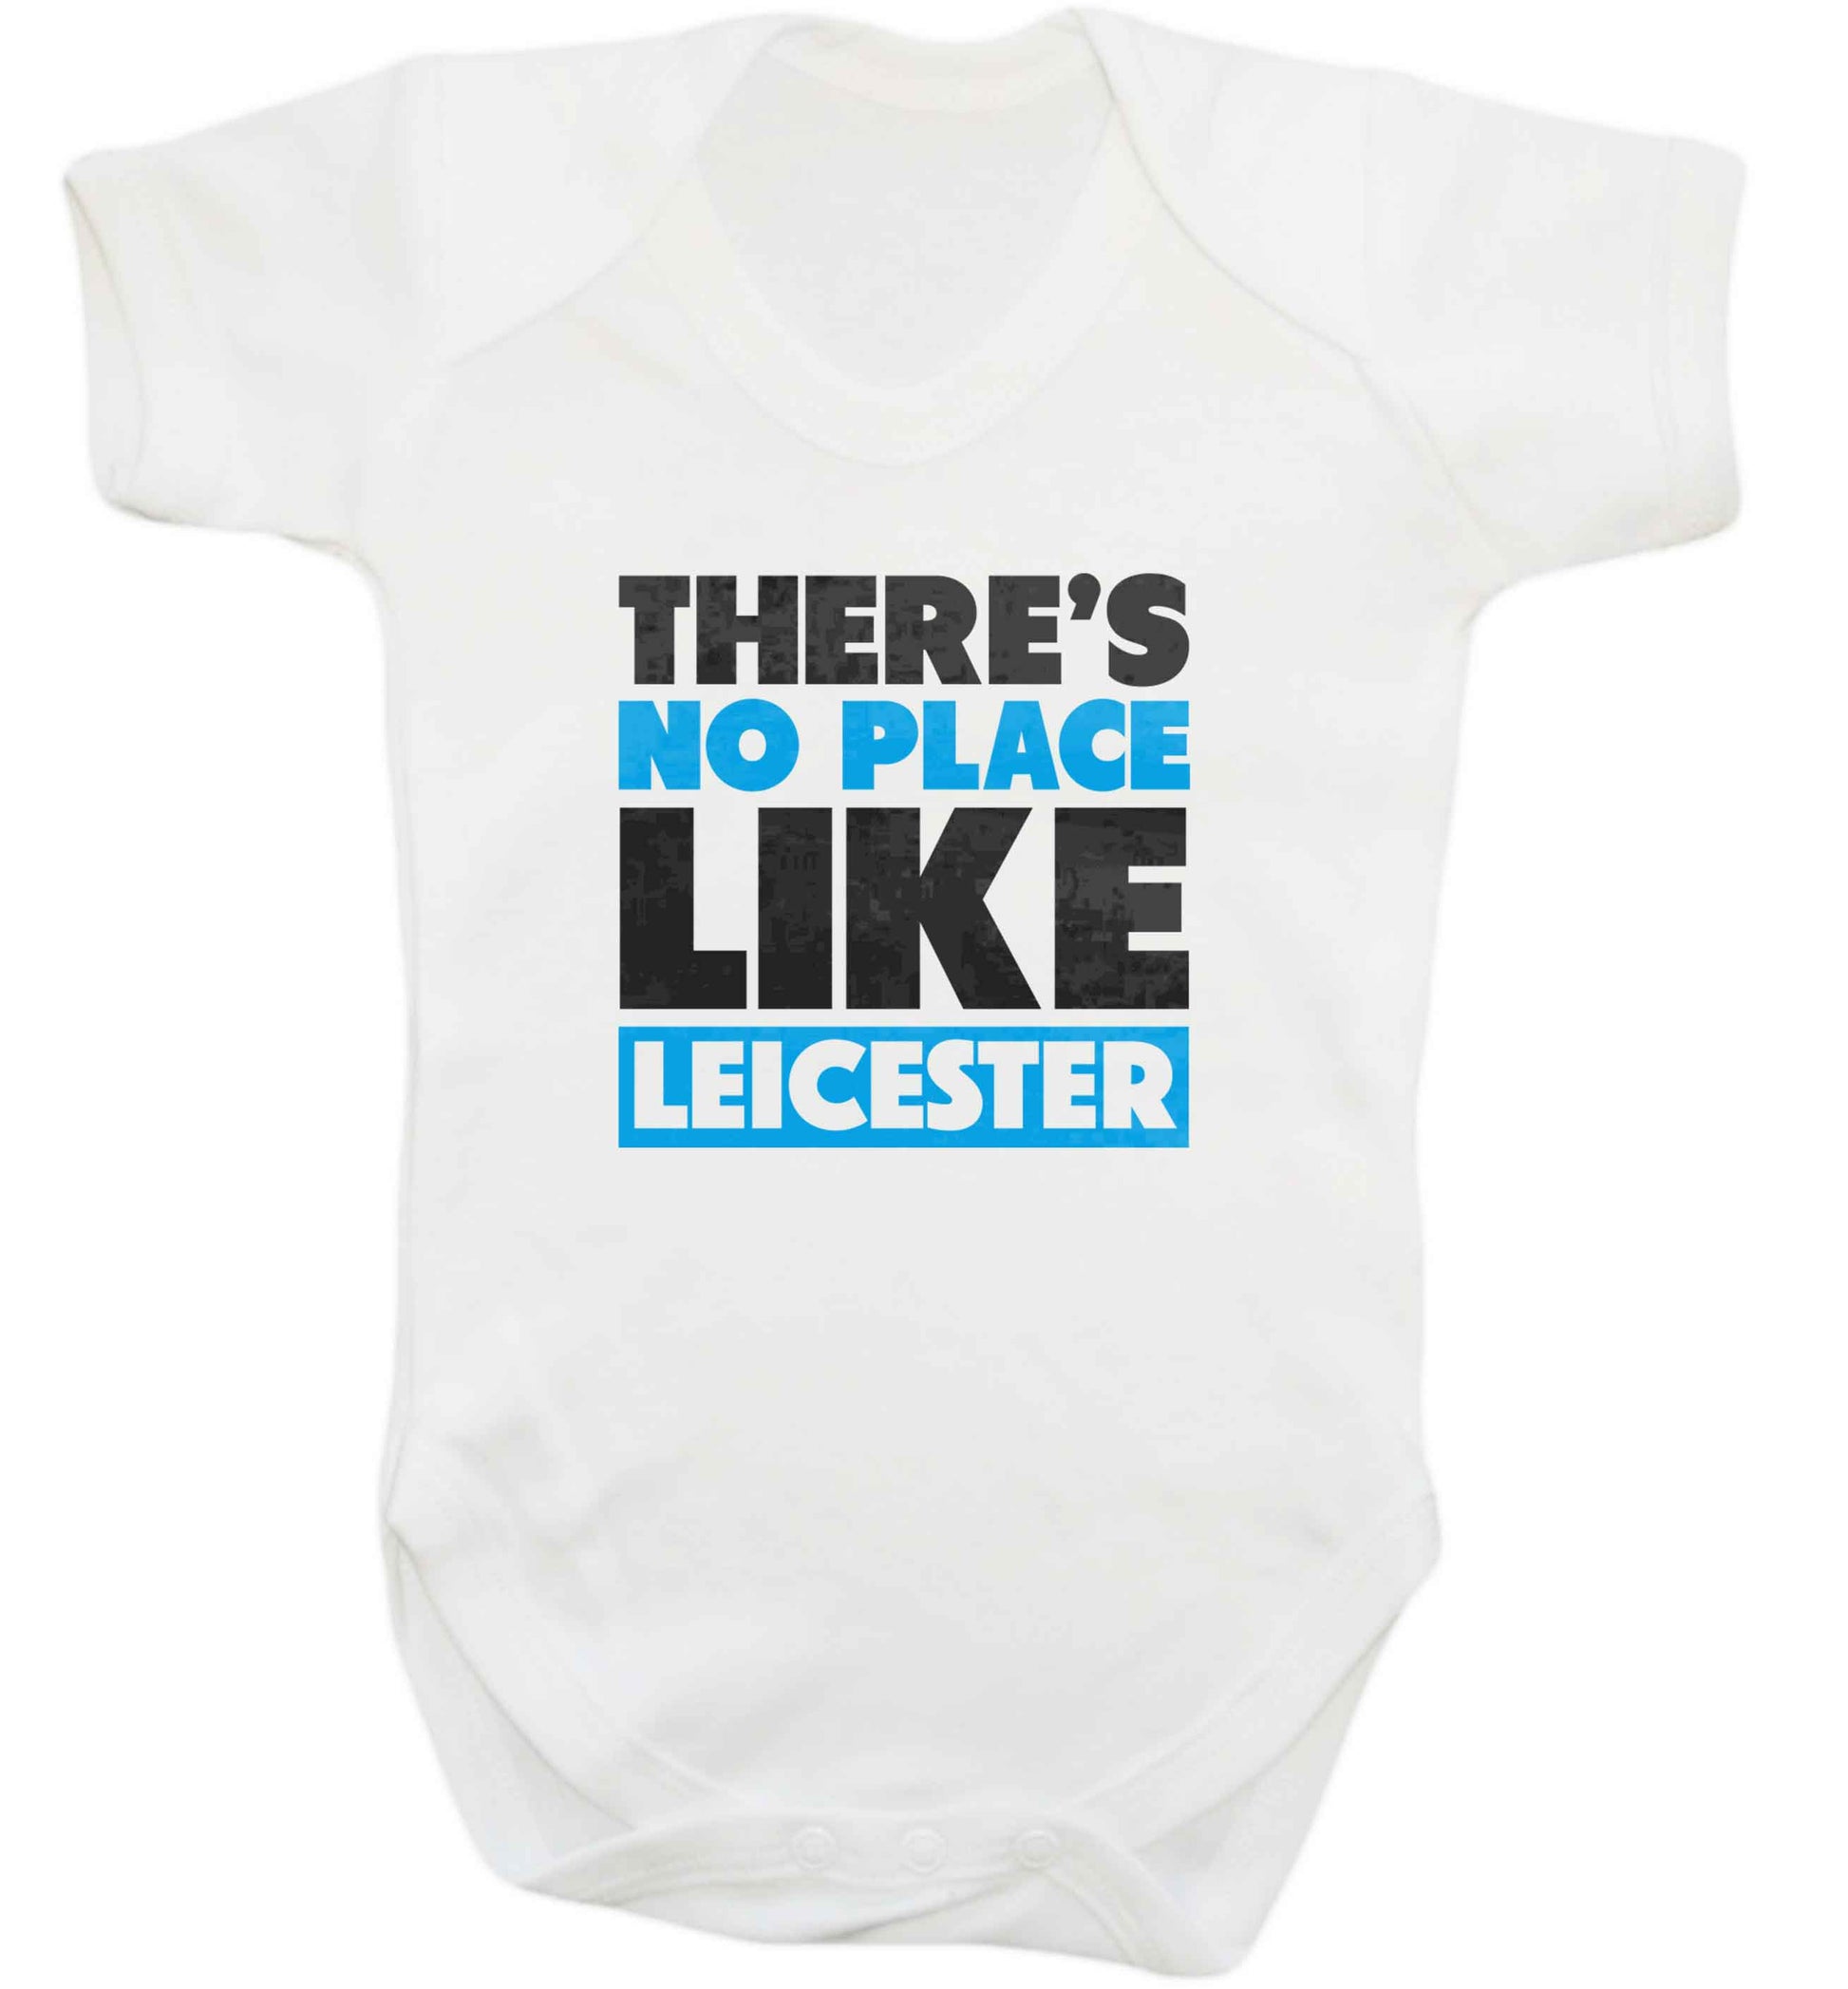 There's no place like Leicester baby vest white 18-24 months